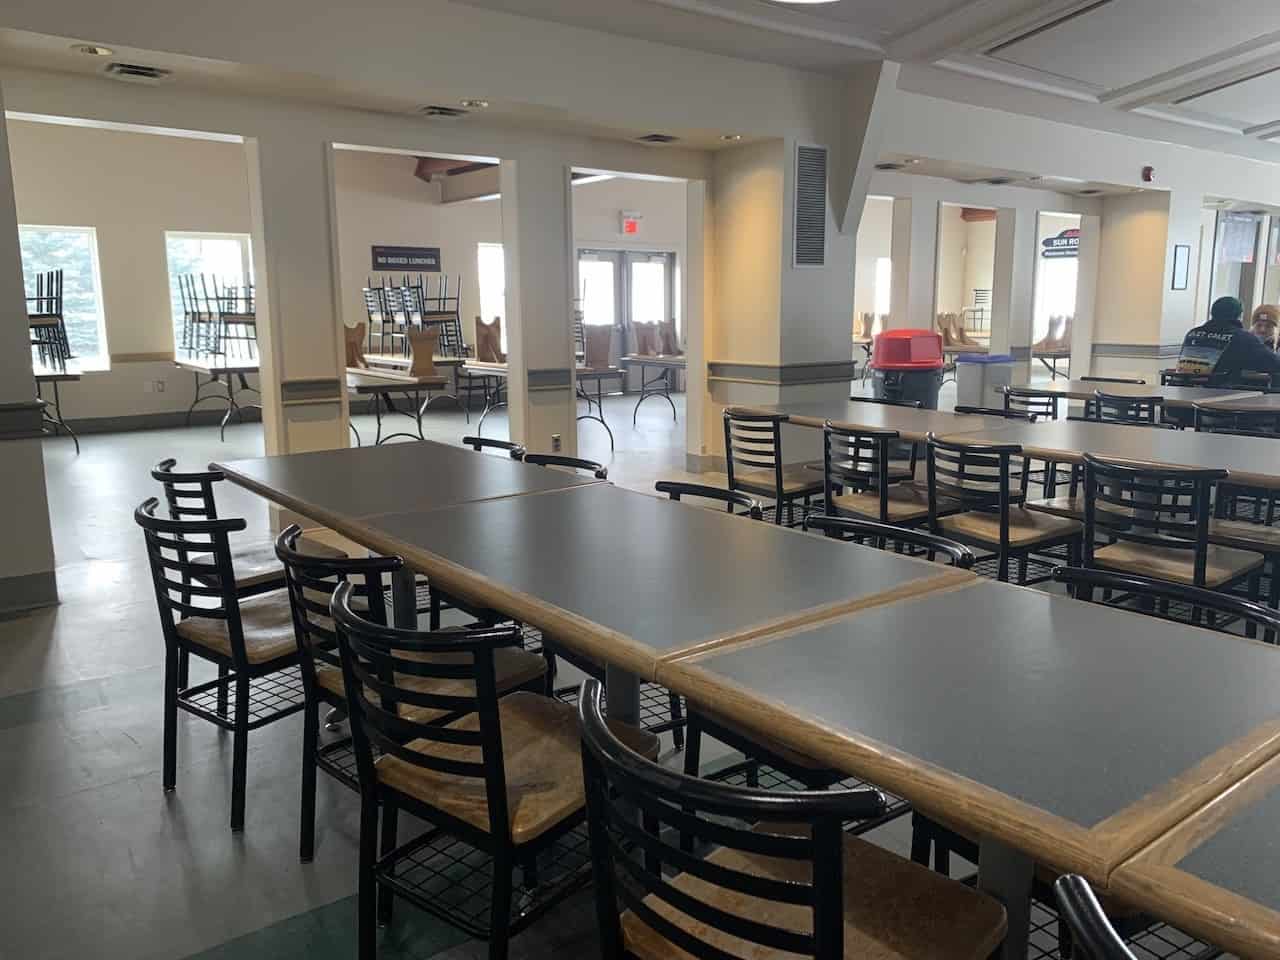 Mount St. Louis Coldwater Ontario Cafeteria Eating Area - There were plenty of tables and chairs set up on the first and second floors of the lodge. On busy days it can be difficult to find a seat.